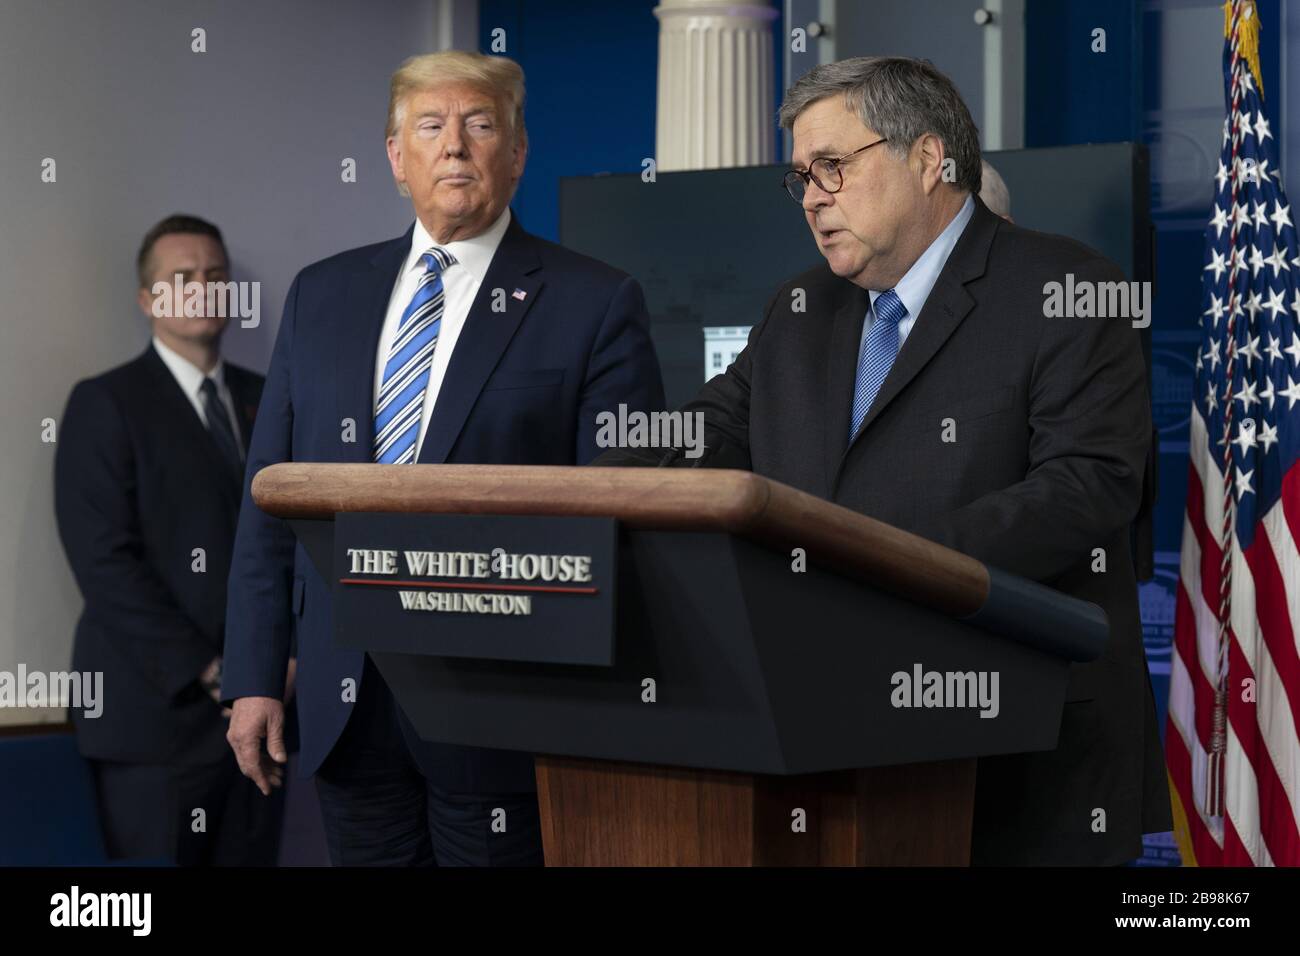 Washington, United States. 23rd Mar, 2020. President Donald J. Trump listens as the United States Attorney General William P. Barr participates in a news briefing by members of the Coronavirus Task Force at the White House in Washington, DC on March 23, 2020. Photo by Chris Kleponis/UPI Credit: UPI/Alamy Live News Stock Photo